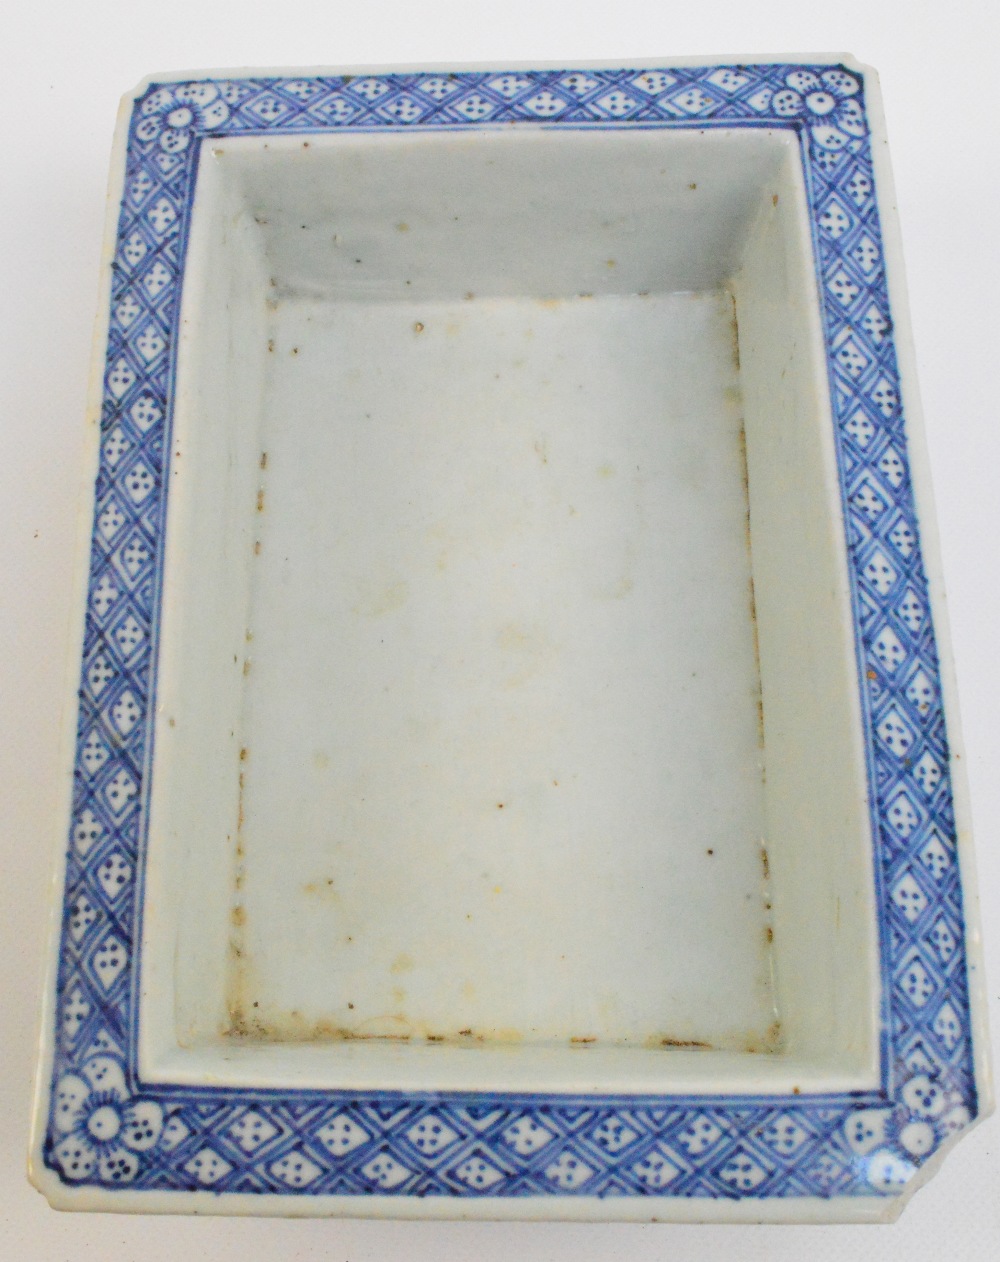 A 19th century Chinese blue and white porcelain double walled rectangular dish with pierced outer - Image 2 of 5